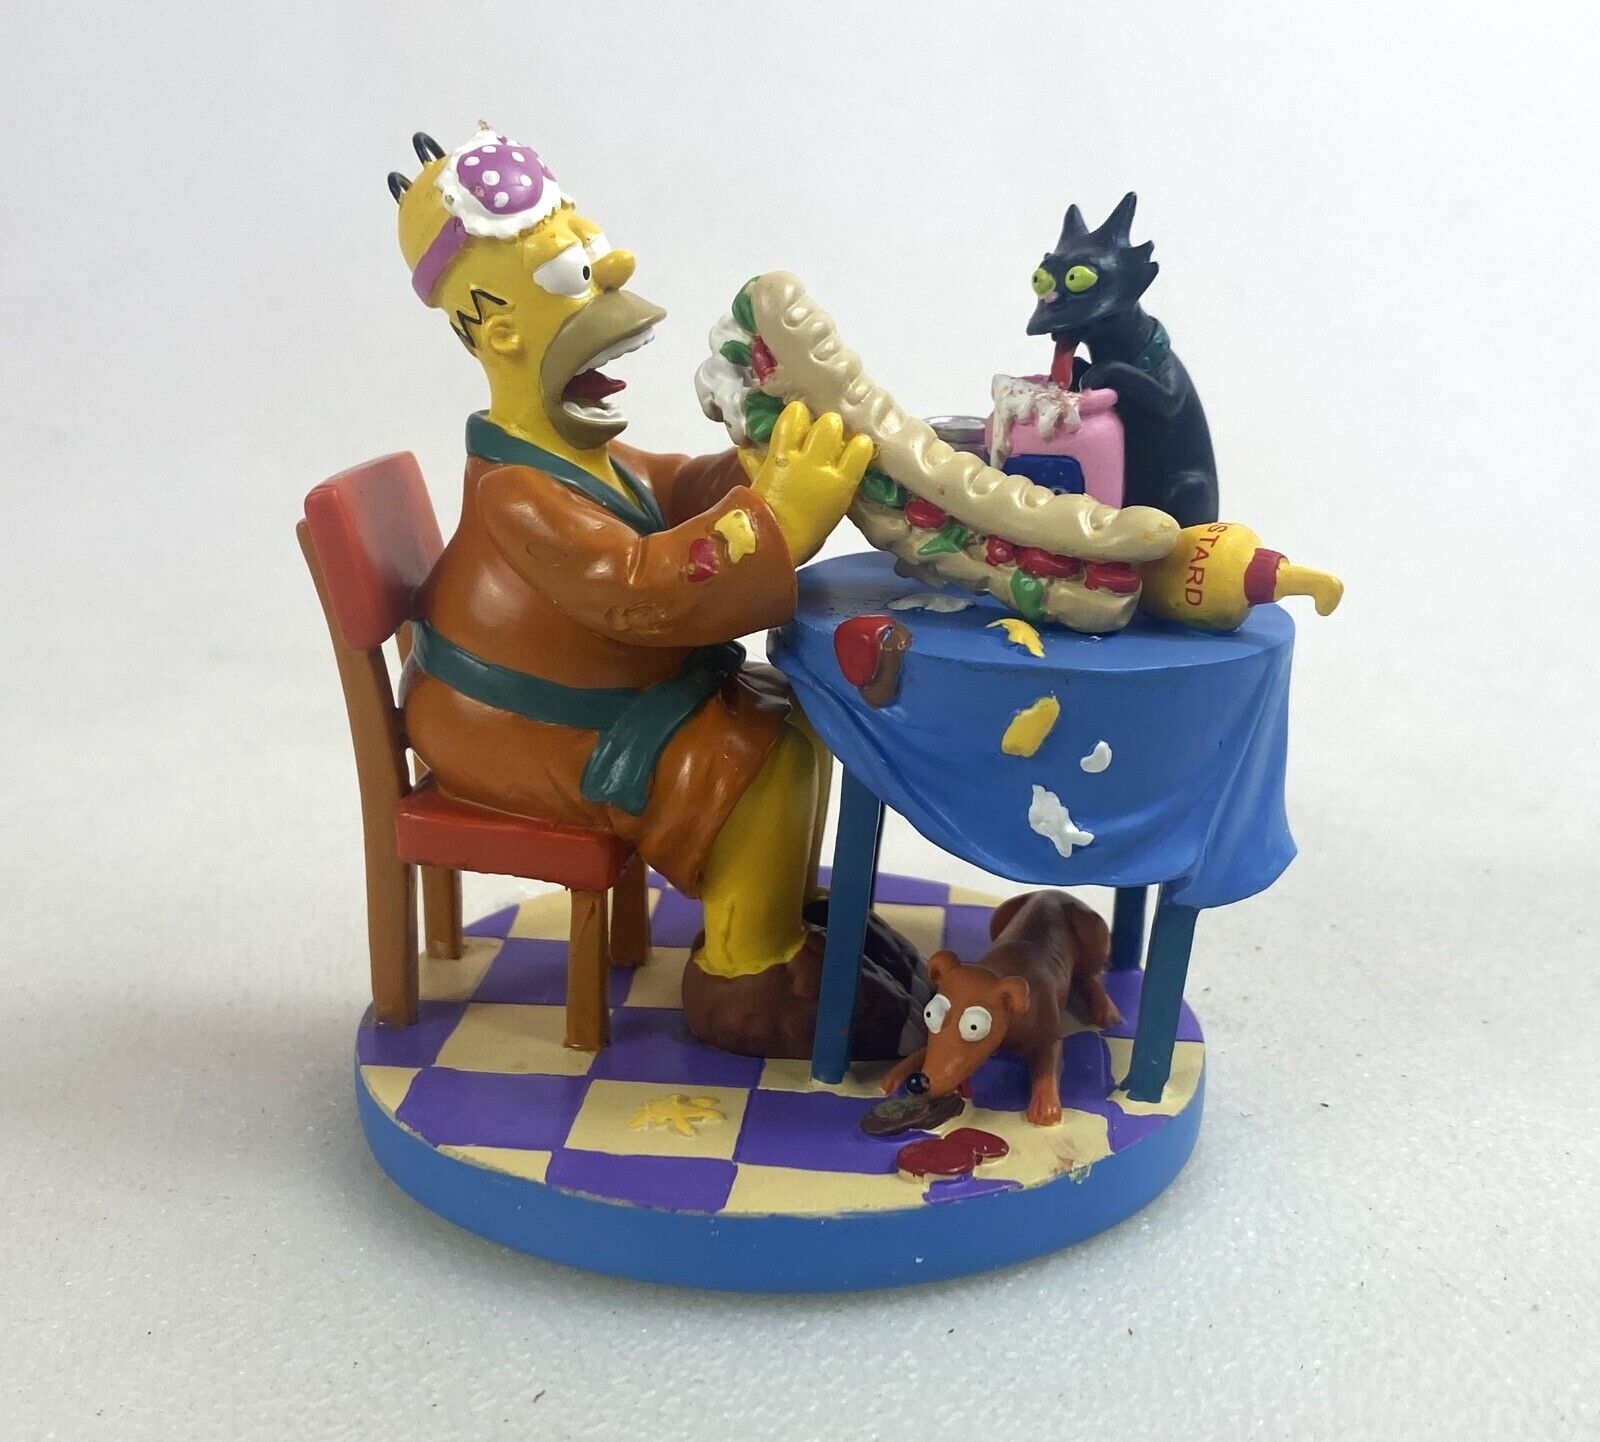 Midnight Snack The Simpsons At Home w/ Homer Sculpture Collection New Hamilton